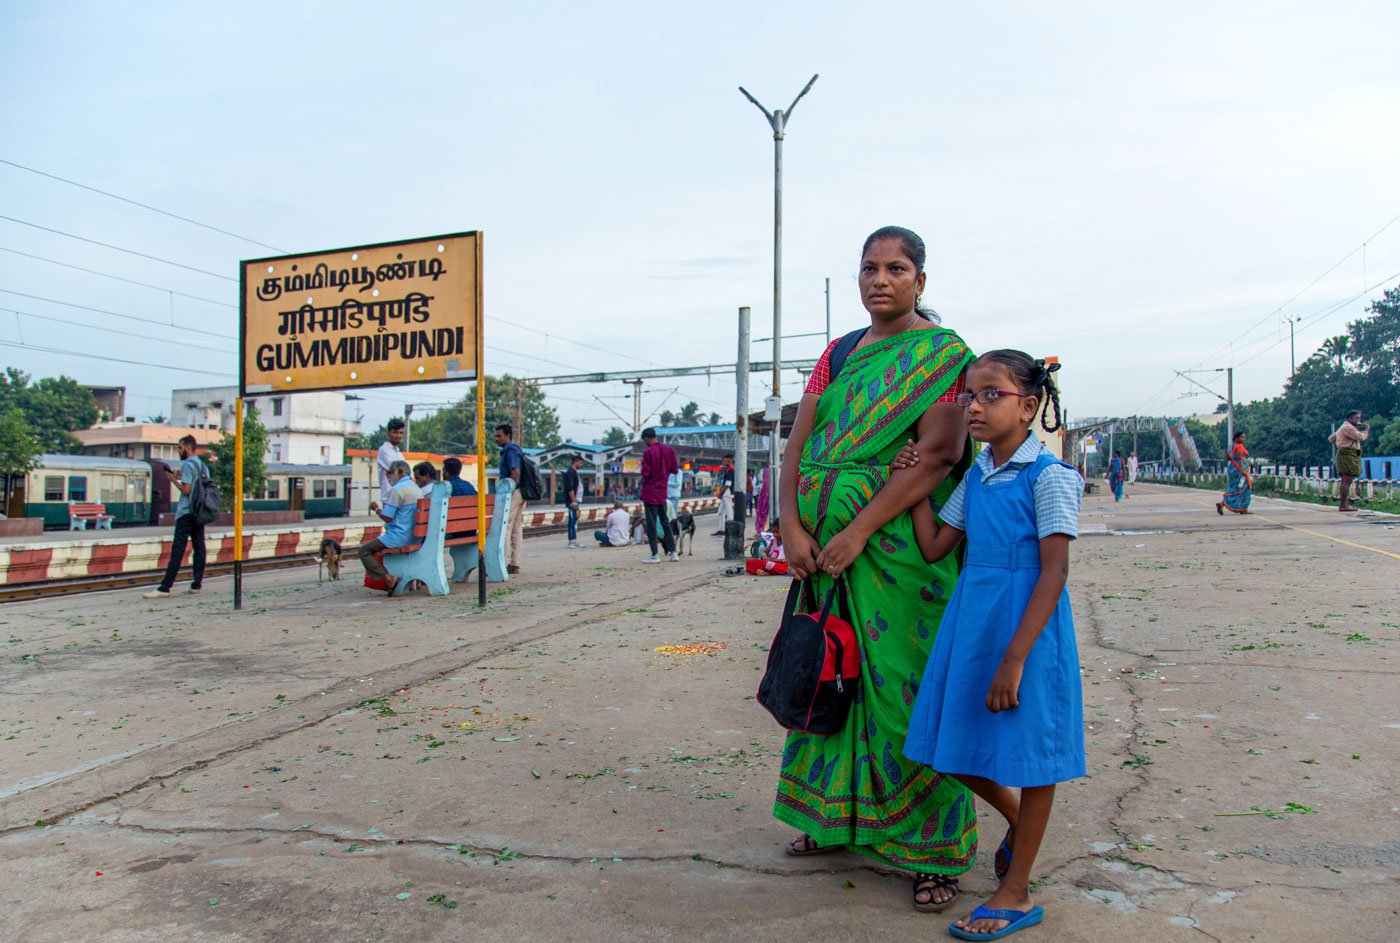 Saranya Balaraman waiting for the local train with her daughter, M. Lebana, at Gummidipoondi railway station. They travel to Chennai every day to attend a school for children with visual impairment. It's a distance of 100 kilometres each day; they leave home at 6 a.m. and return by 7 p.m.